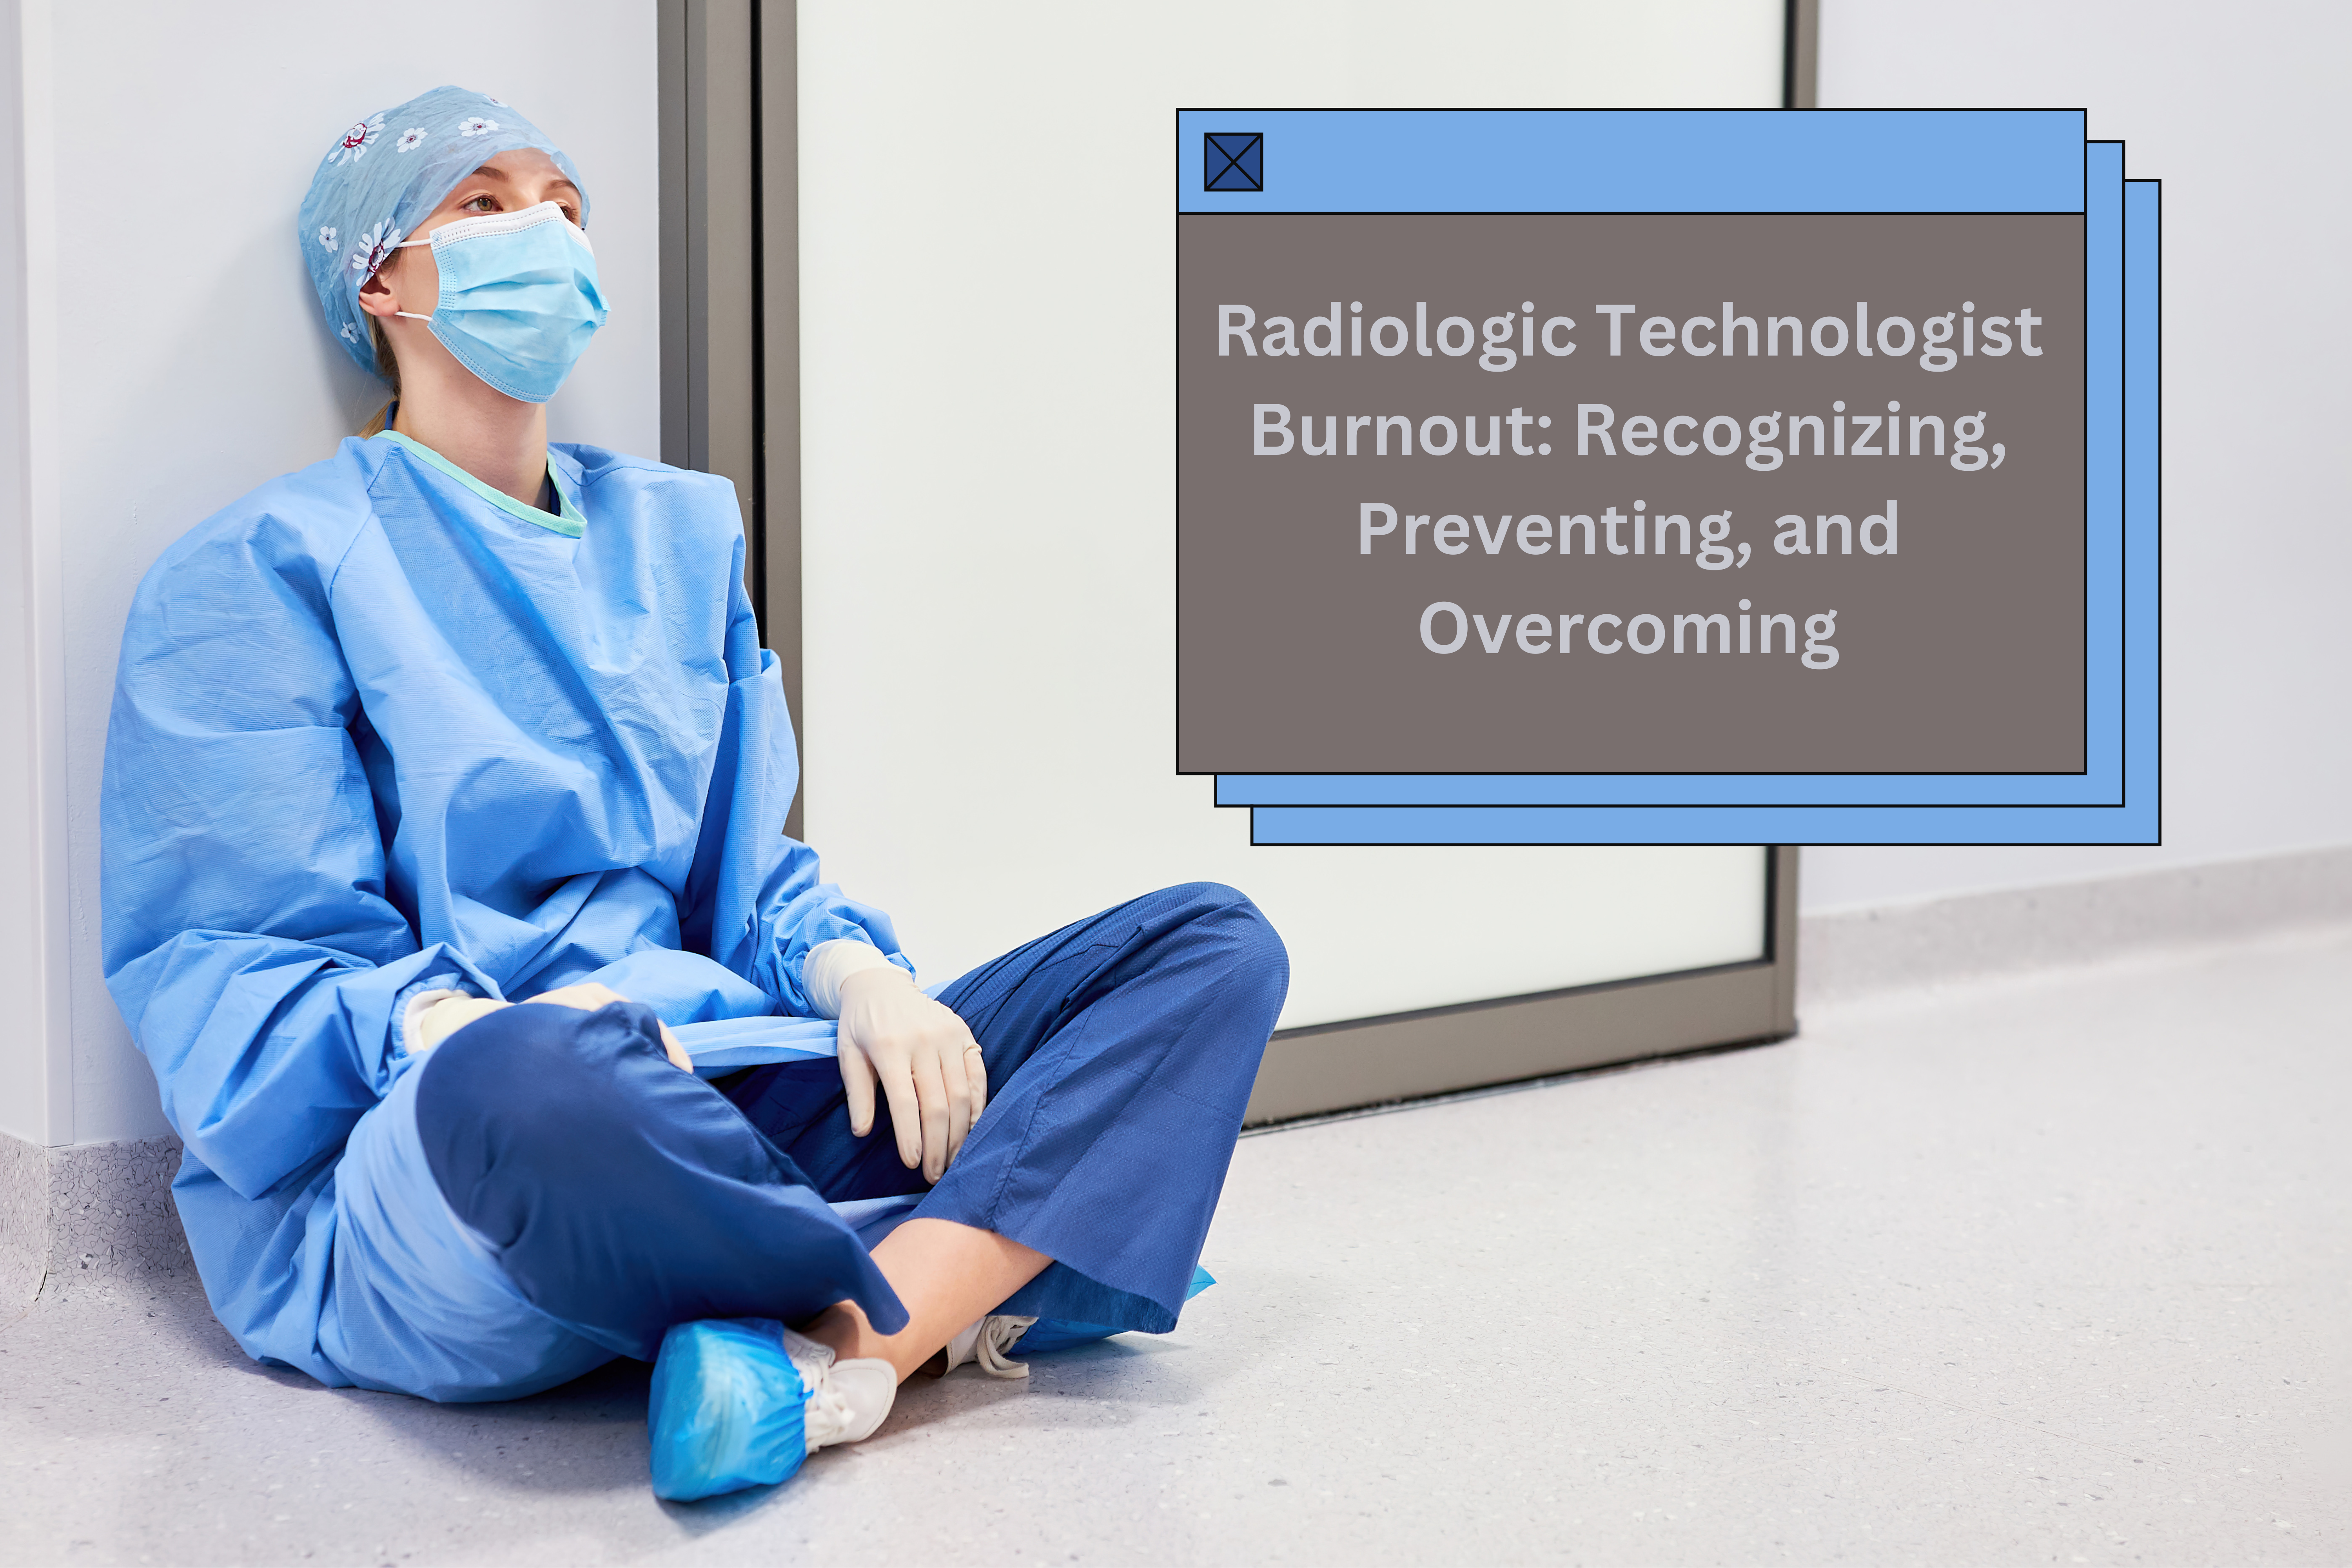 Radiologic Technologist Burnout: Recognizing, Preventing, and Overcoming